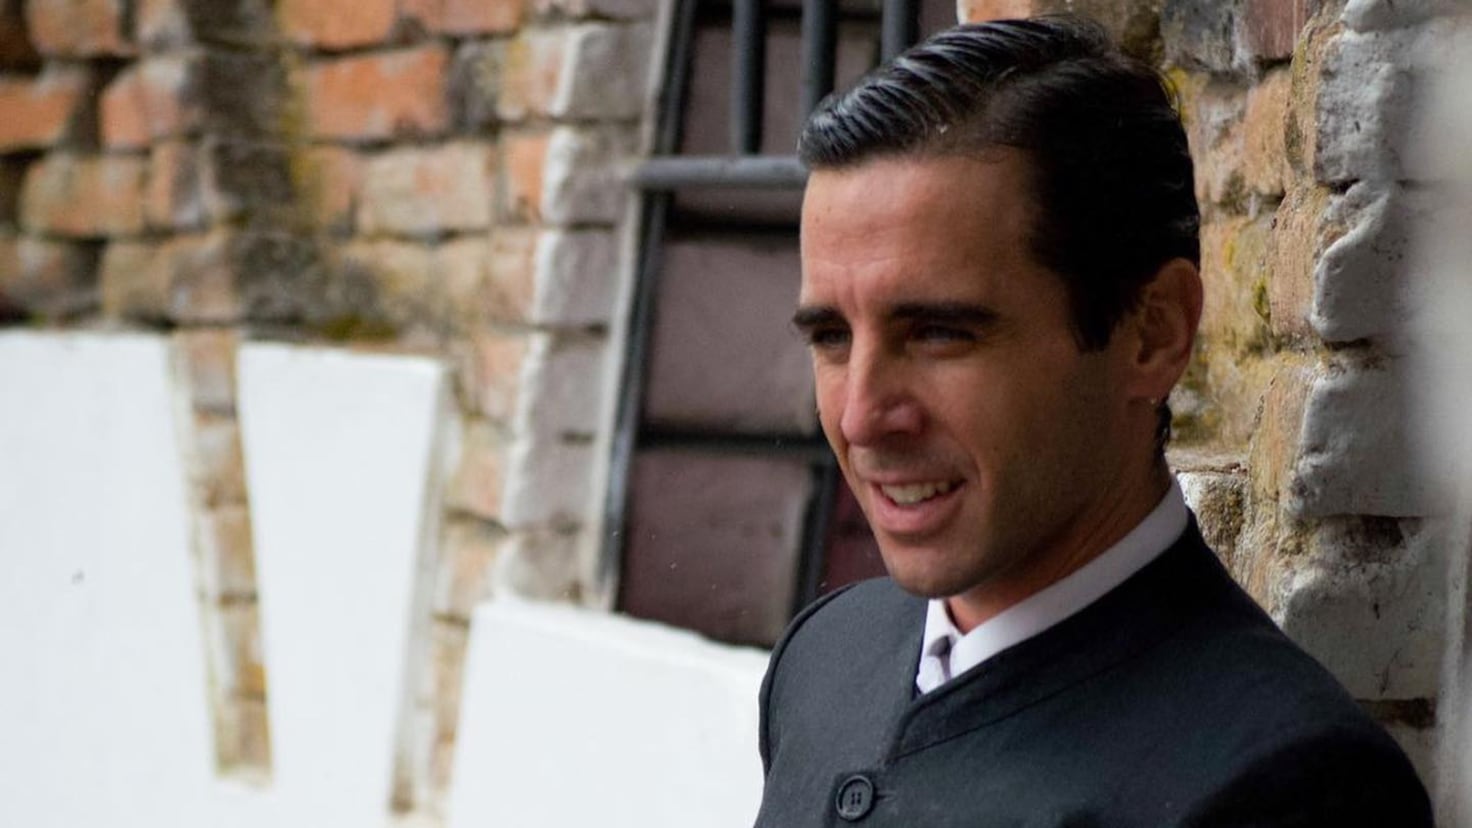 Juan Ortega's doubts before his wedding: The priest tells him not to get married
